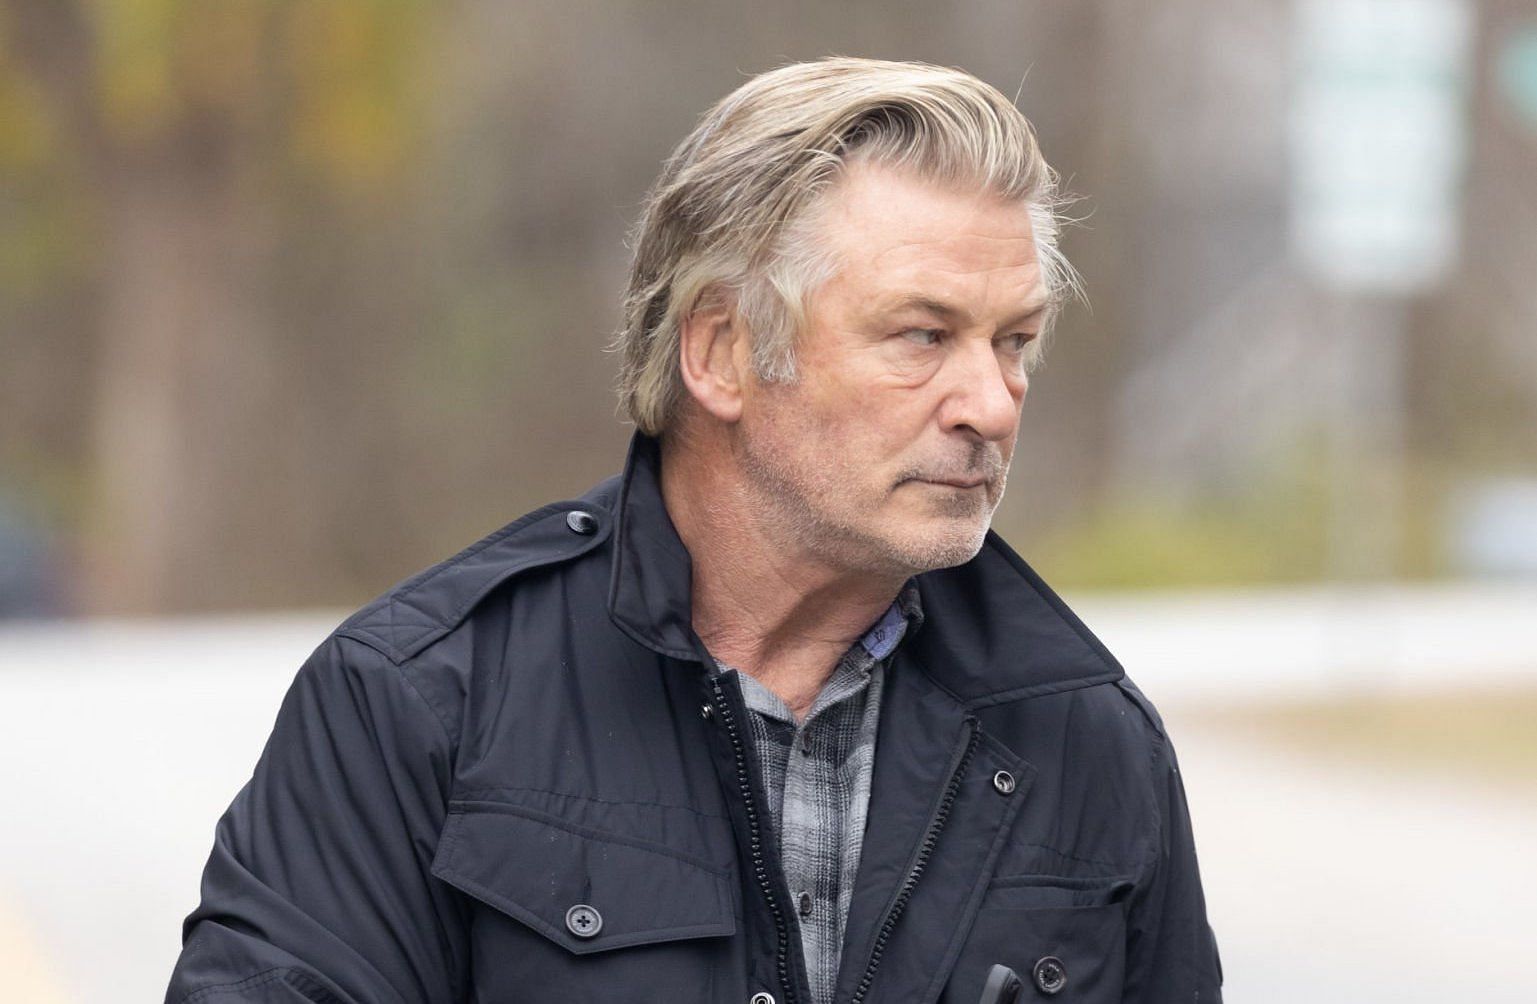 Alec Baldwin accidentally shot and killed Halyna Hutchins on the set of &#039;Rust&#039; movie (Image via Mega/Getty Images)